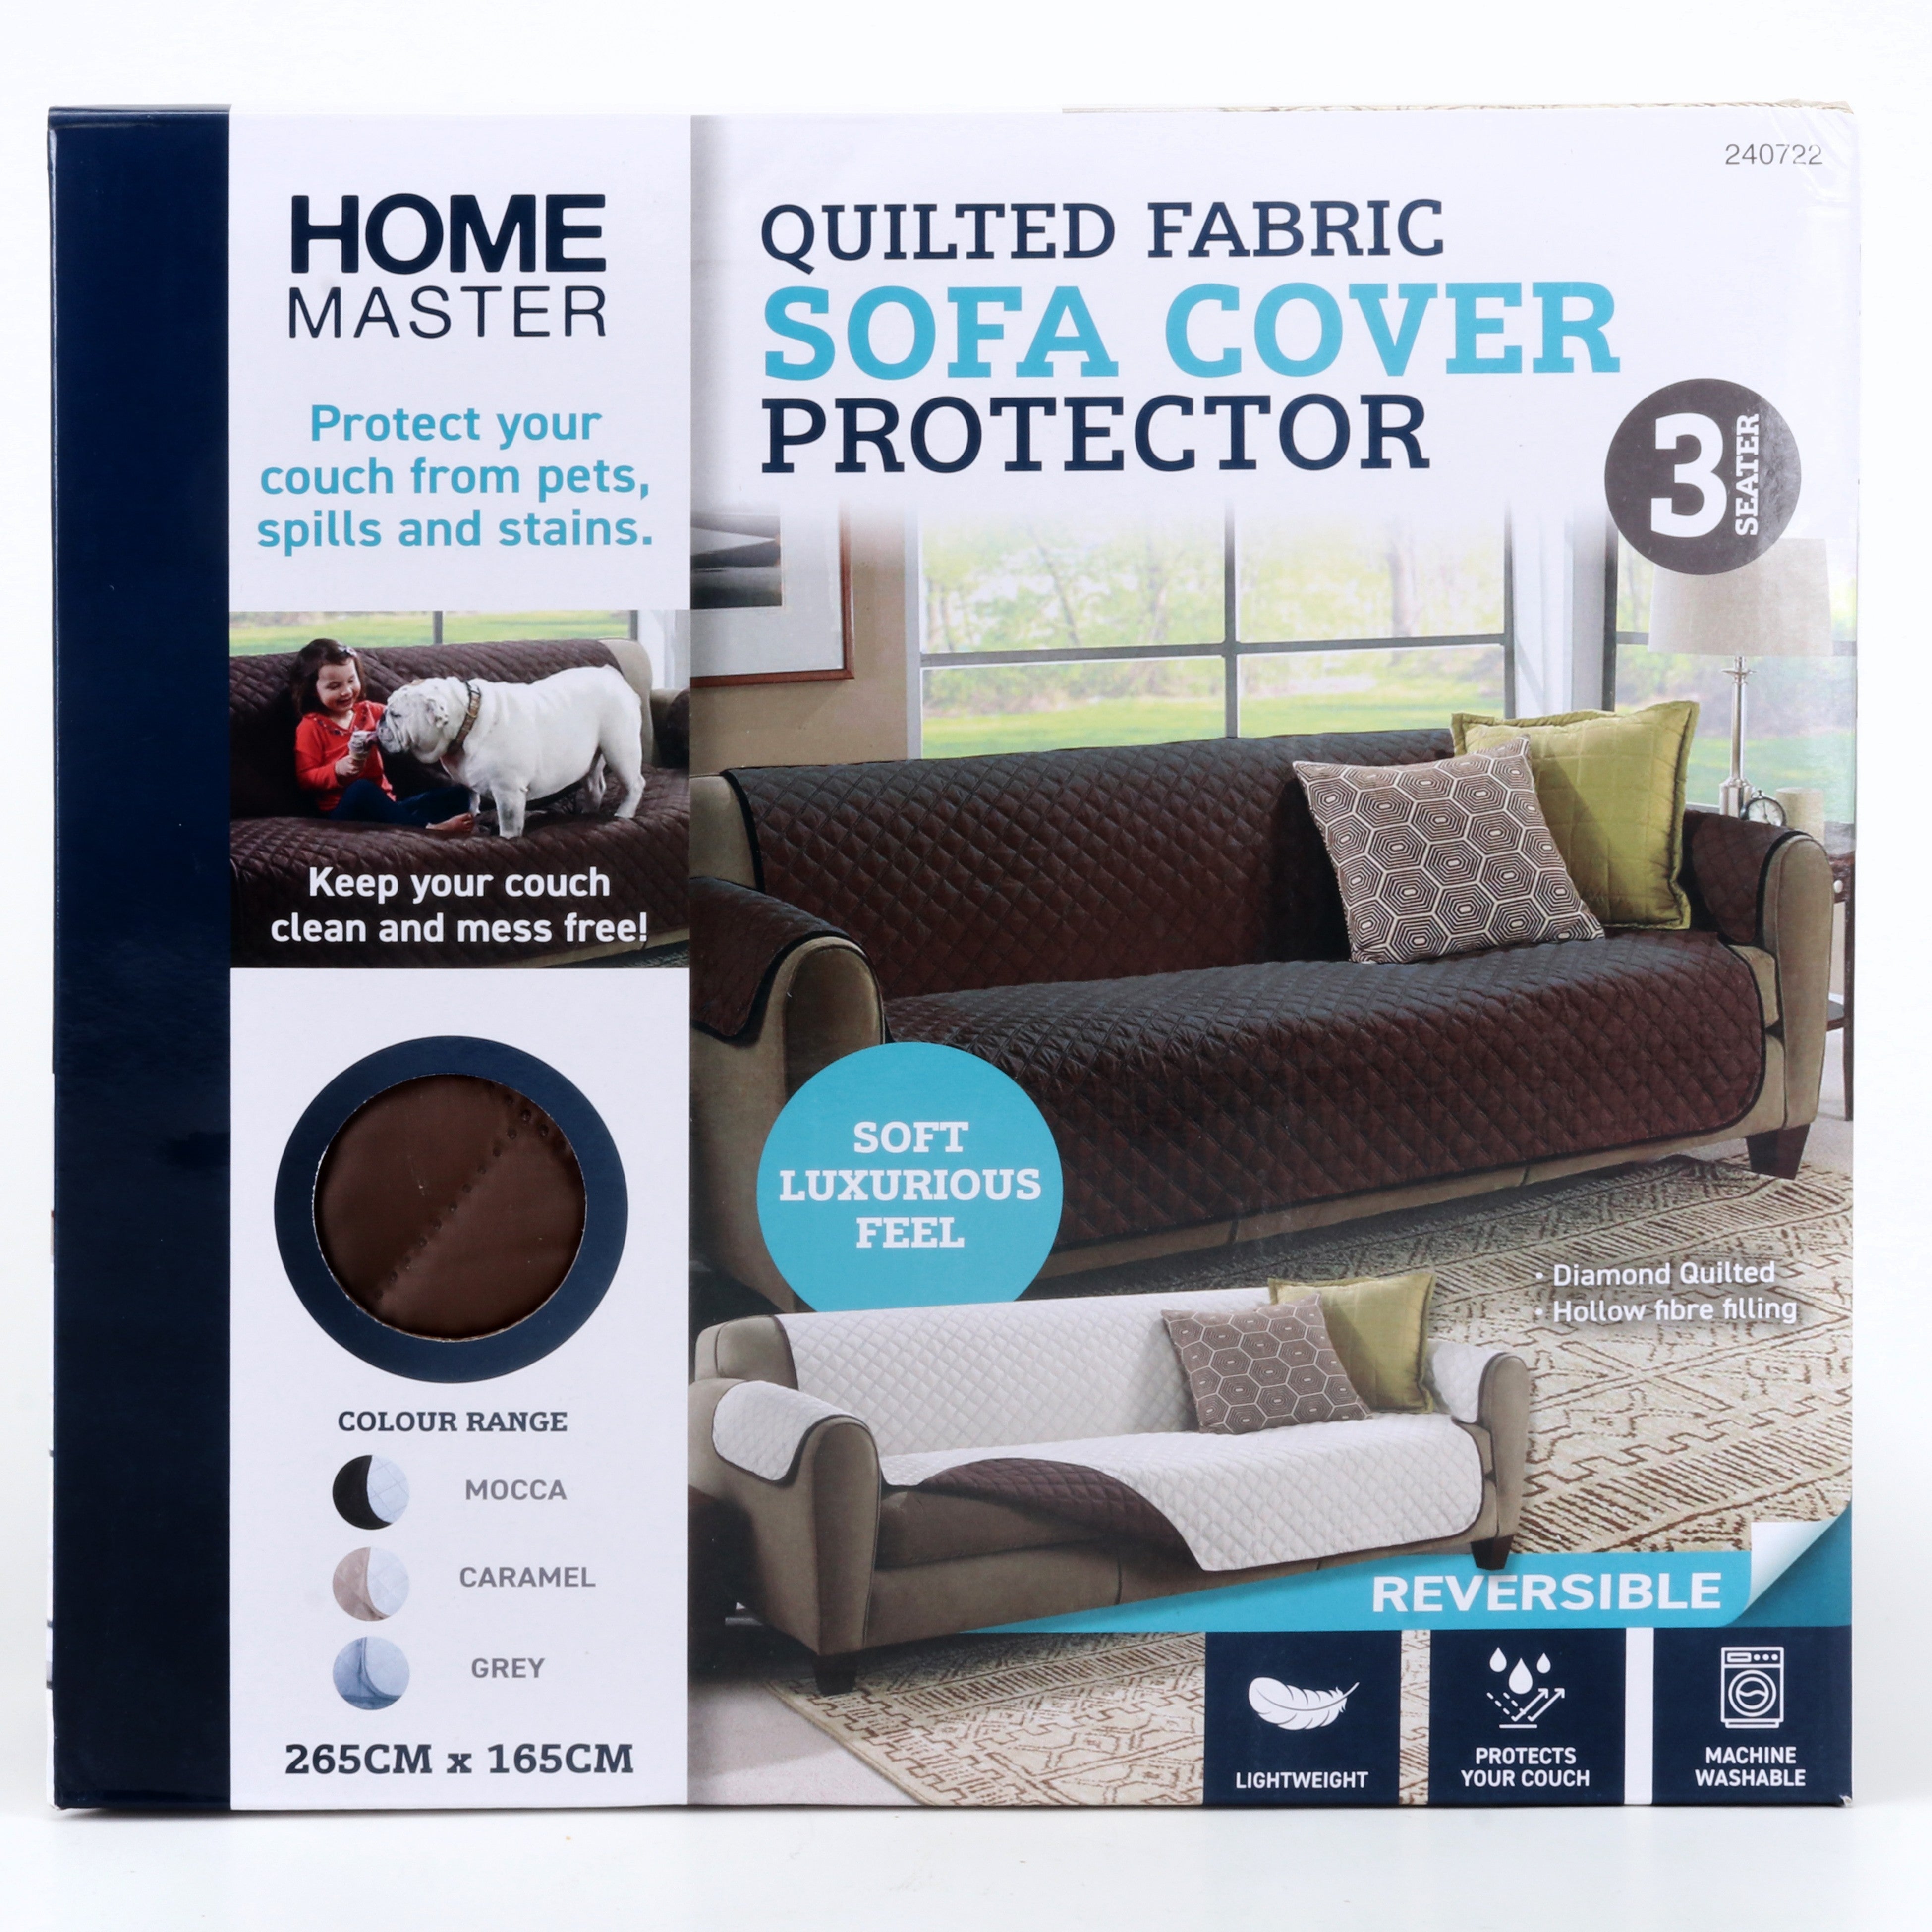 Quilted Fabric Sofa Cover Protector - 256x165cm 1 Piece Assorted Default Title